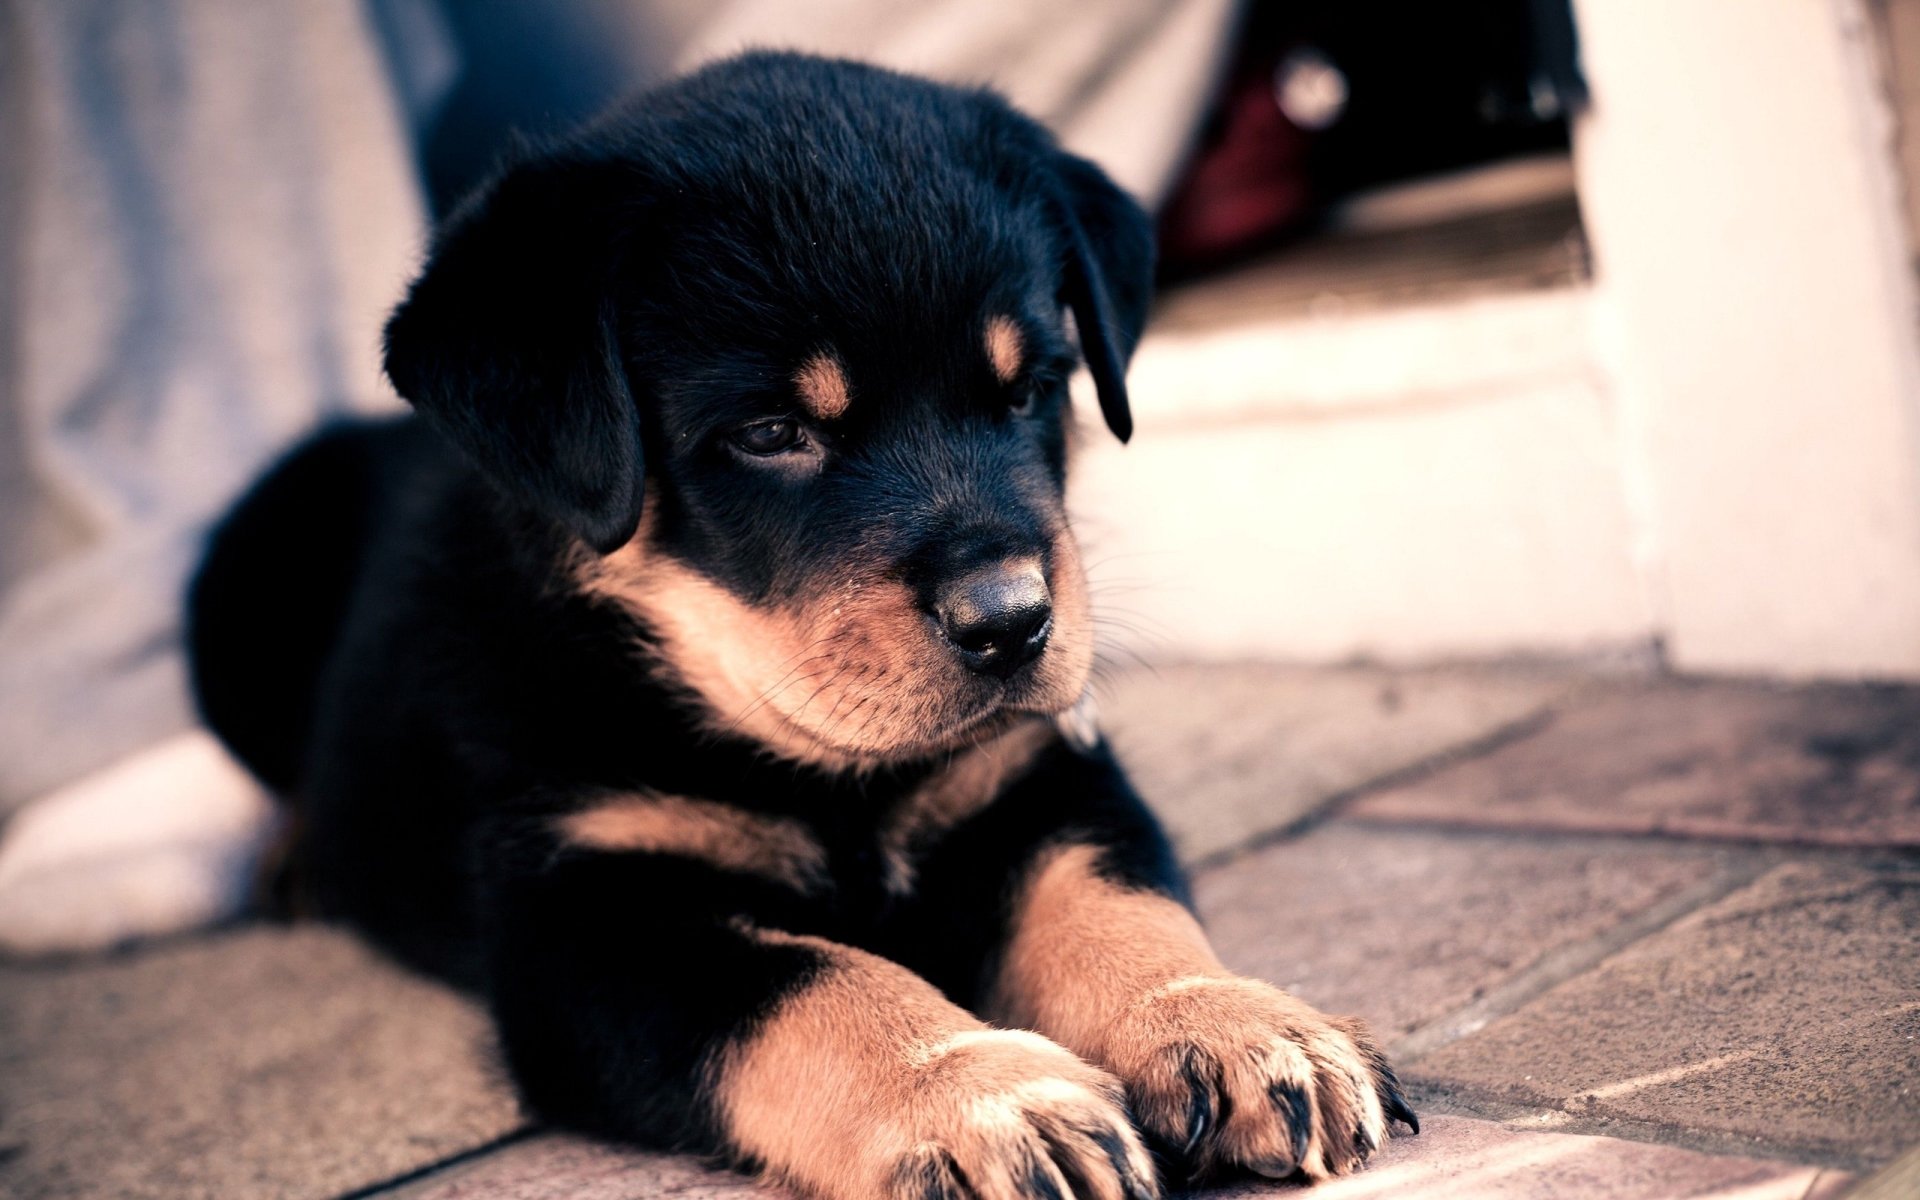 HD wallpaper featuring a cute Rottweiler puppy lying on tiled flooring, gazing thoughtfully.